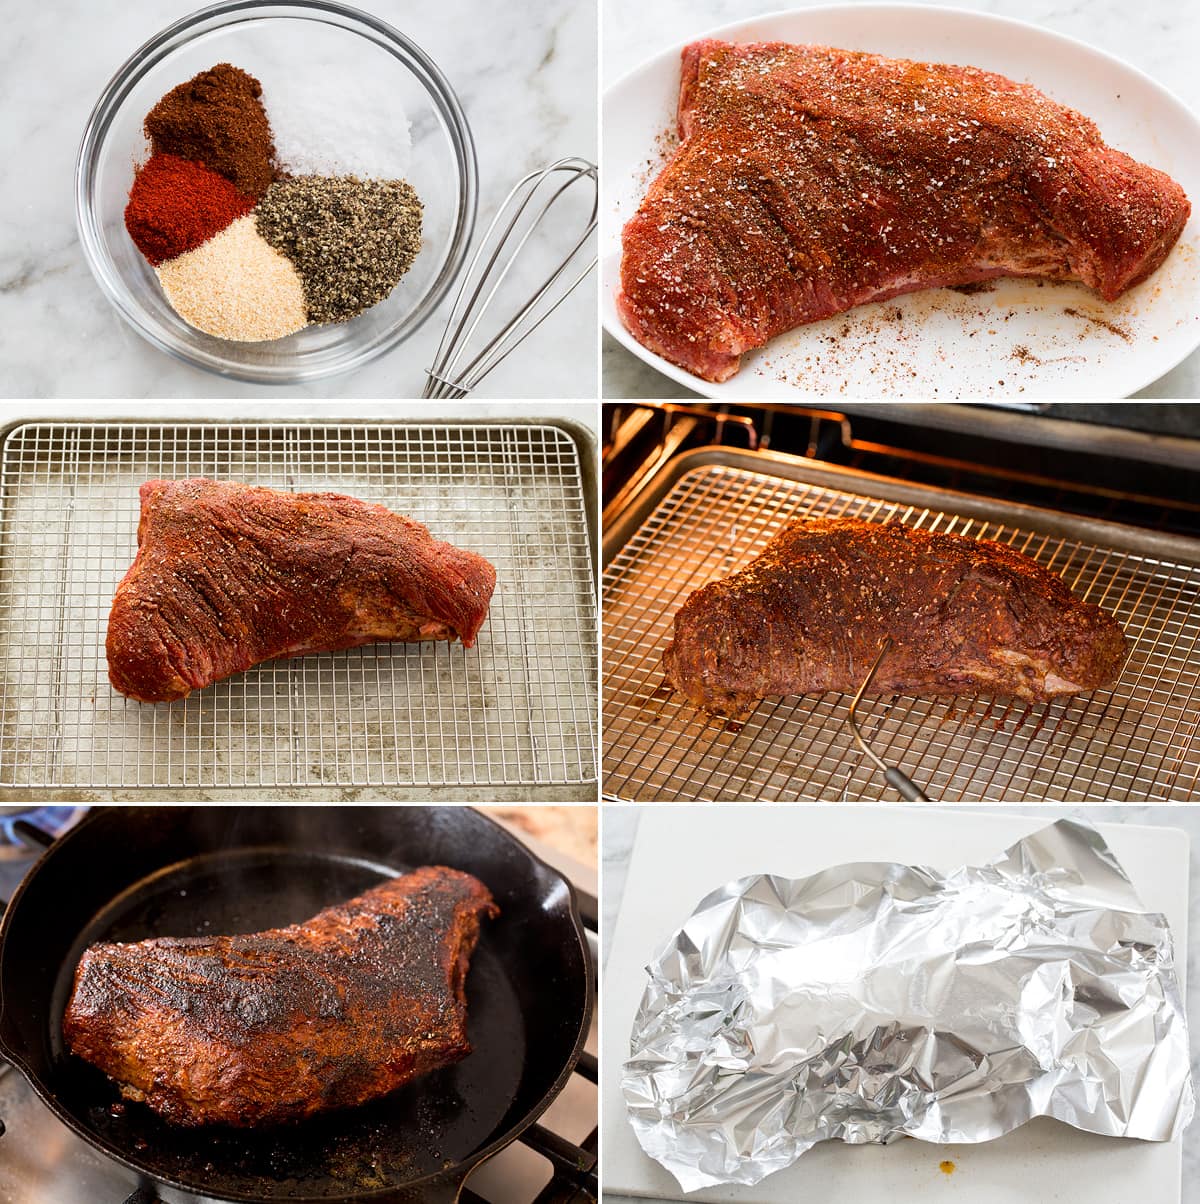 Collage of six images showing how to make and bake roasted tri tip.